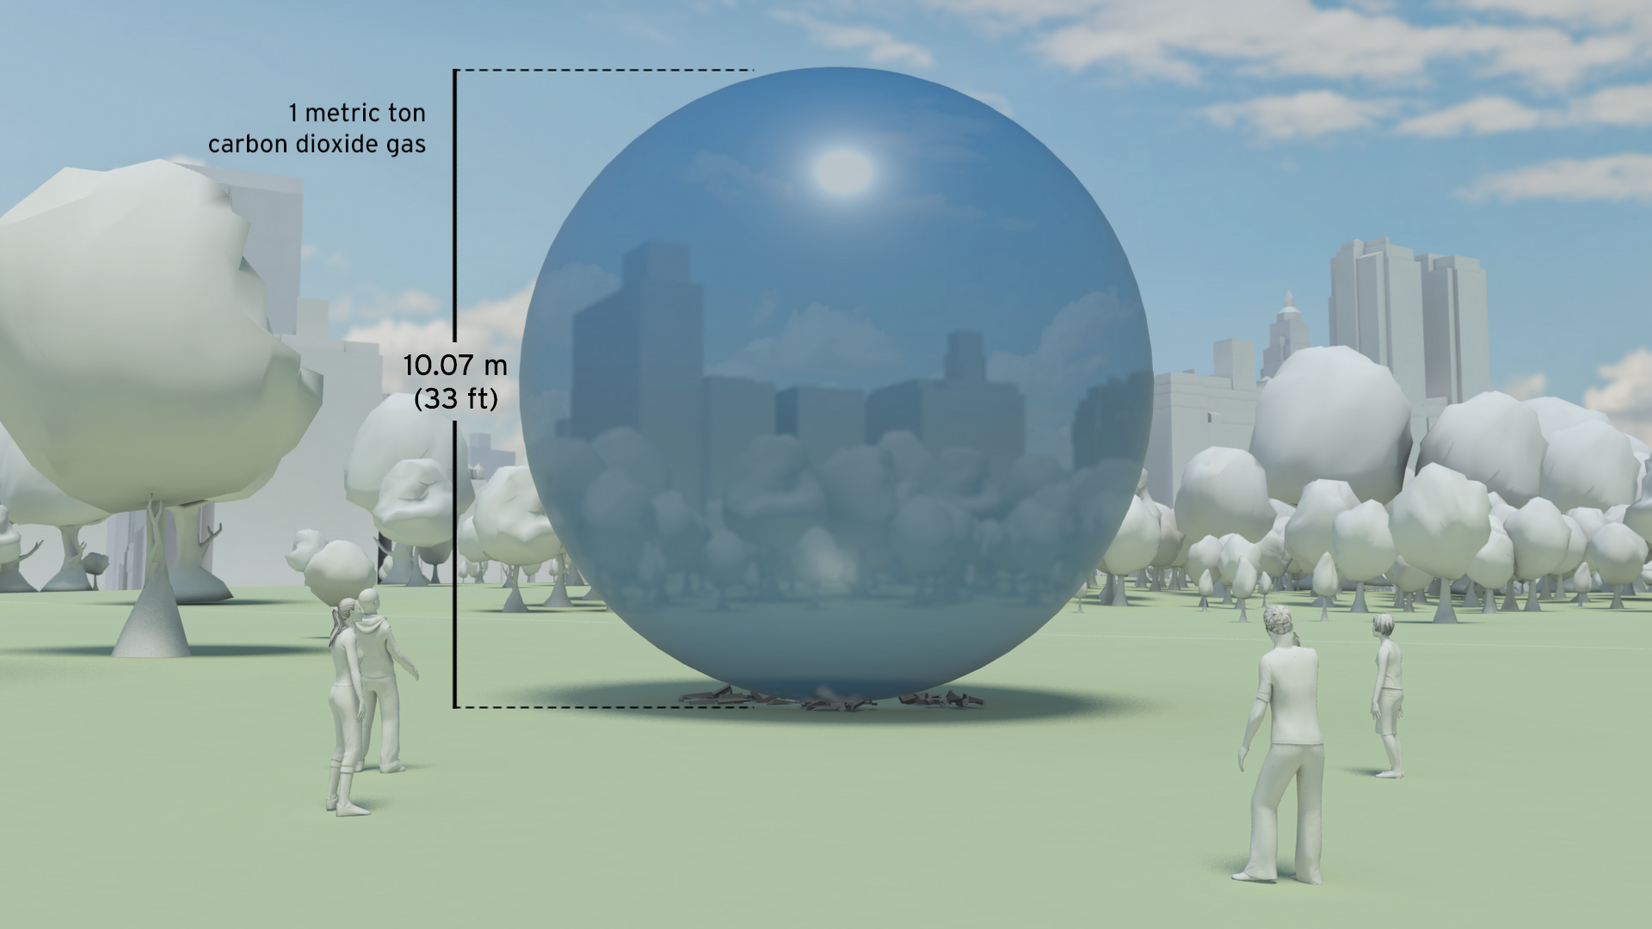 Visual representation of one metric ton of carbon dioxide gas with humans and city for scale